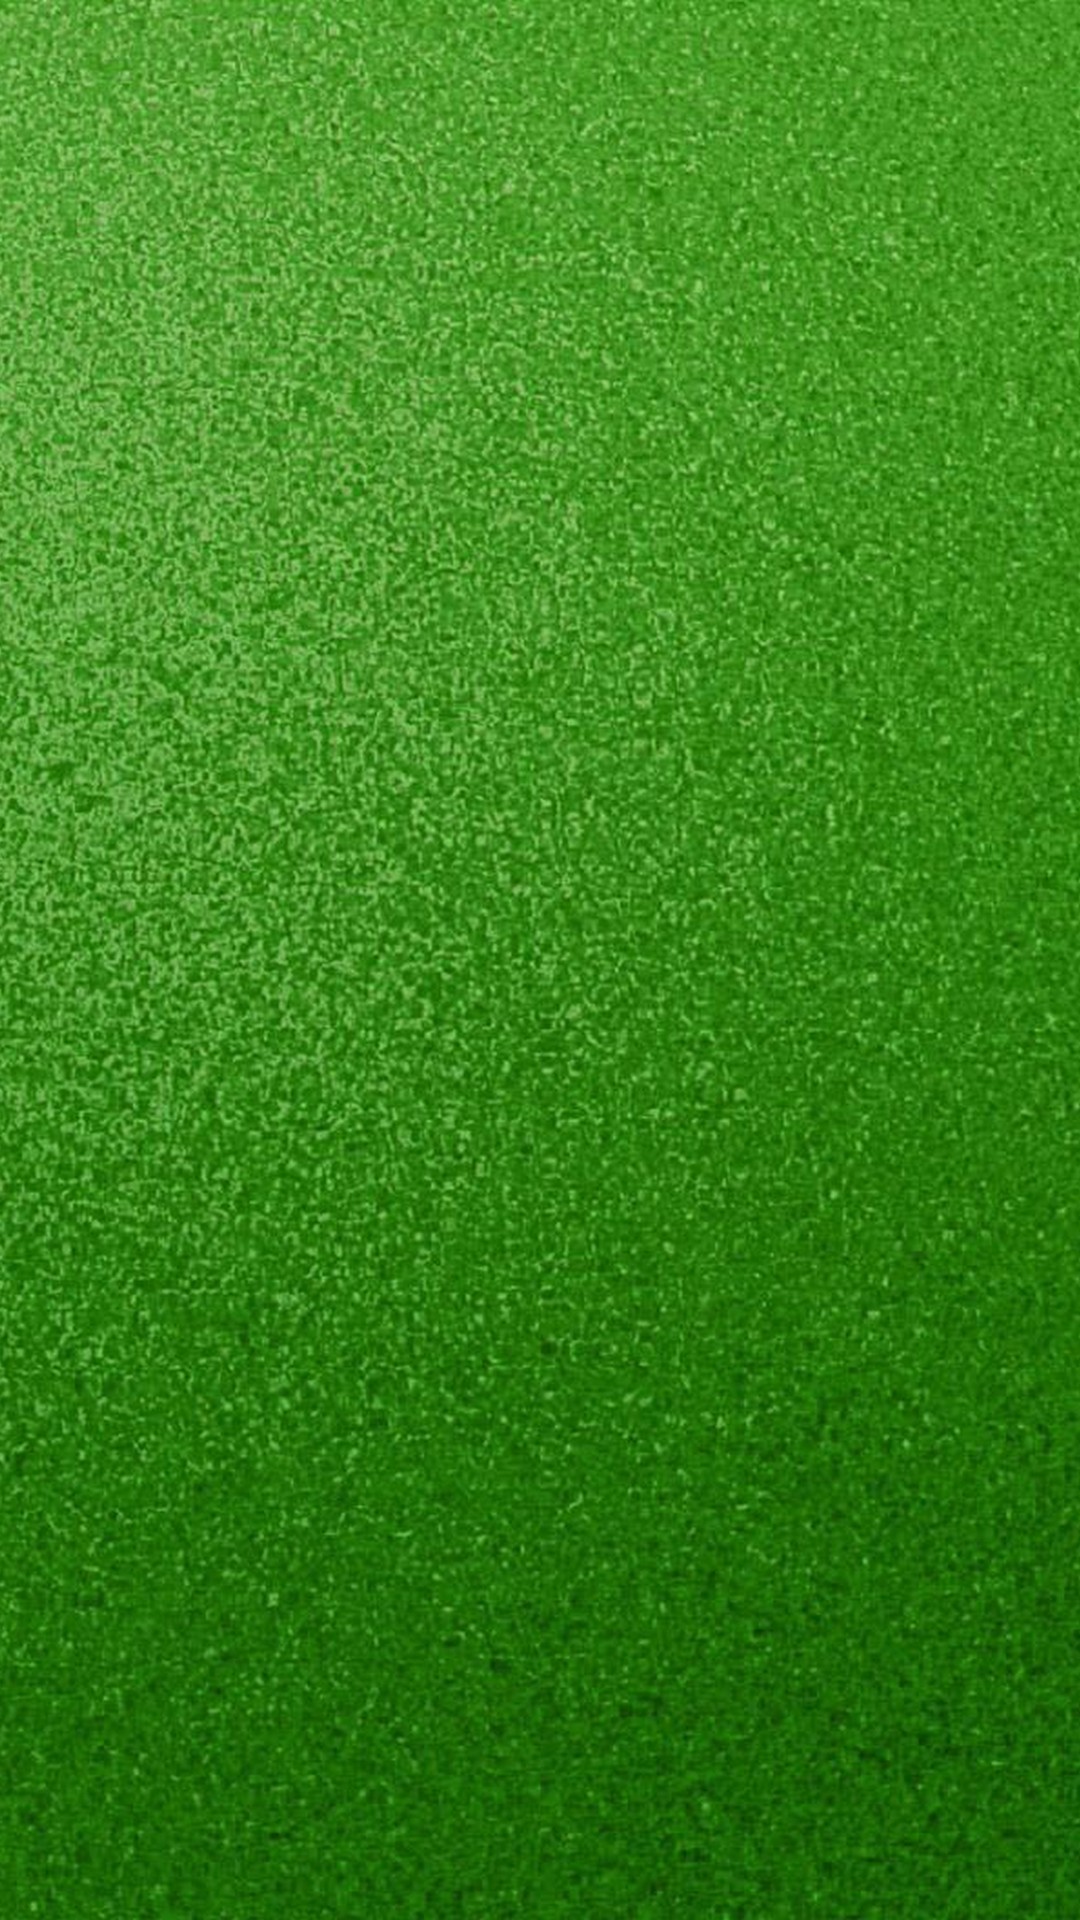 iPhone Wallpaper Green with resolution 1080X1920 pixel. You can make this wallpaper for your iPhone 5, 6, 7, 8, X backgrounds, Mobile Screensaver, or iPad Lock Screen